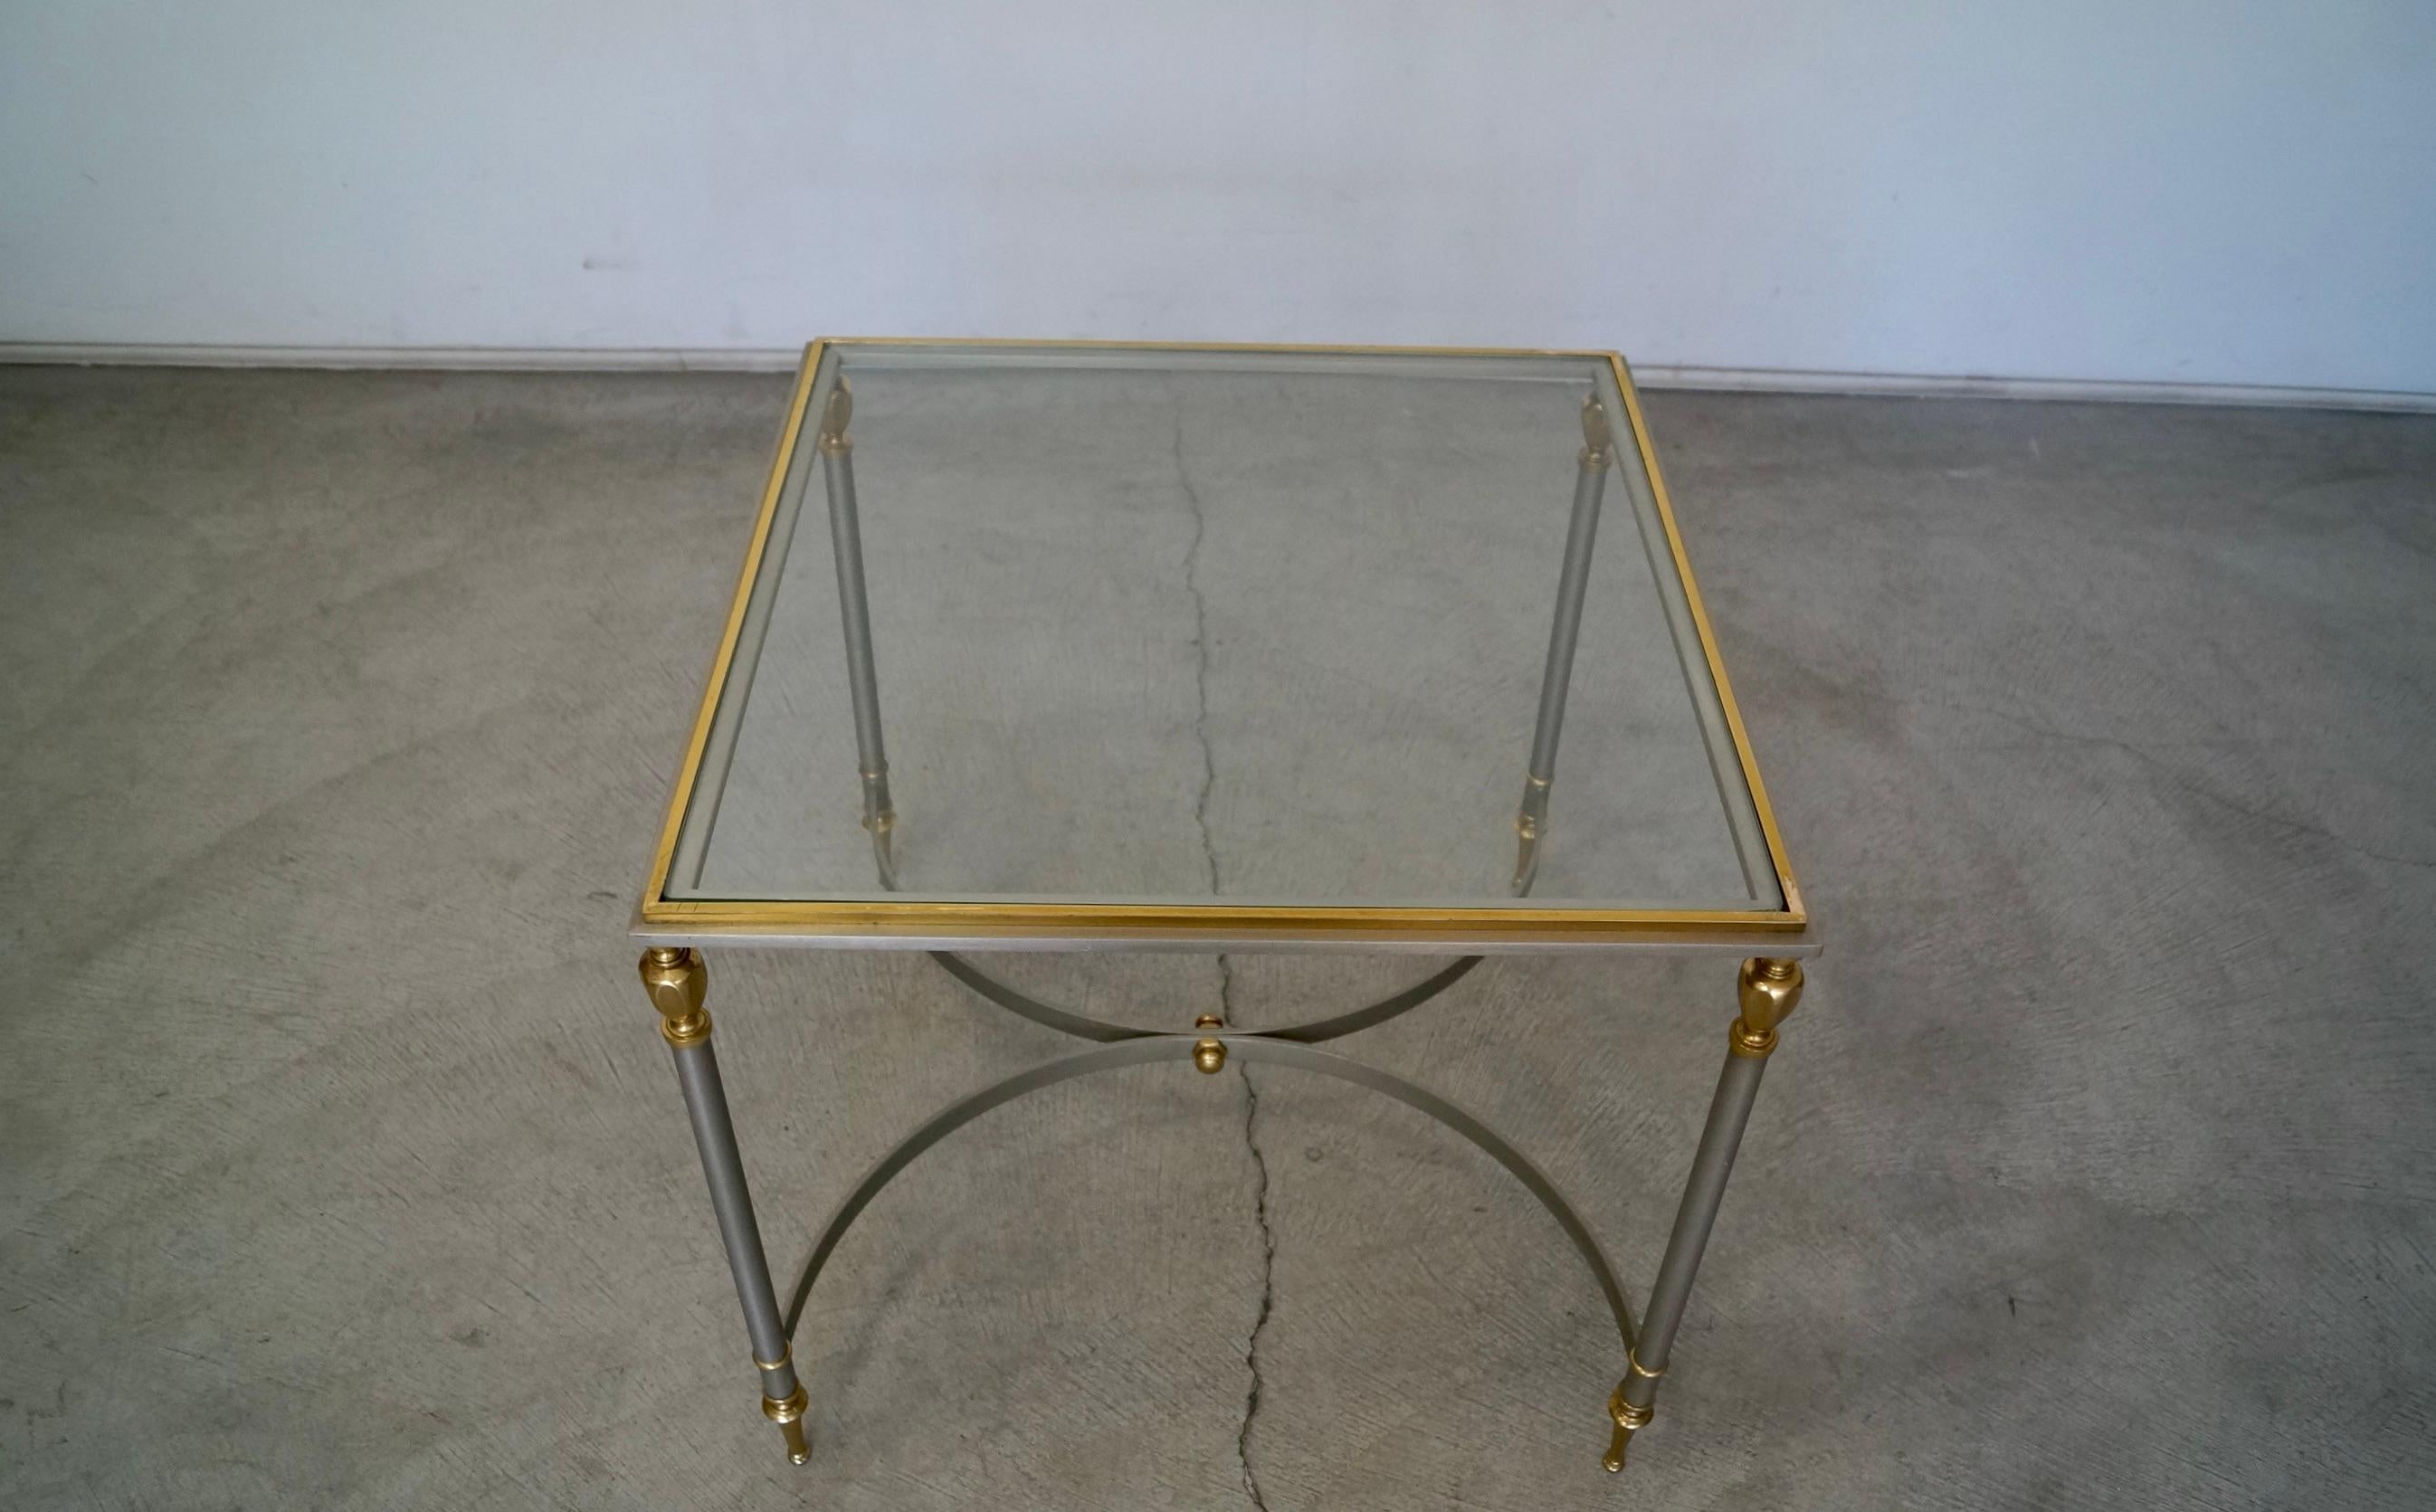 Vintage Hollywood Regency cocktail table / side table for sale. From the late 1960s, and manufactured in Italy. It's really well designed and well constructed, and made of solid materials. It has a solid stainless steel frame with brass feet, brass